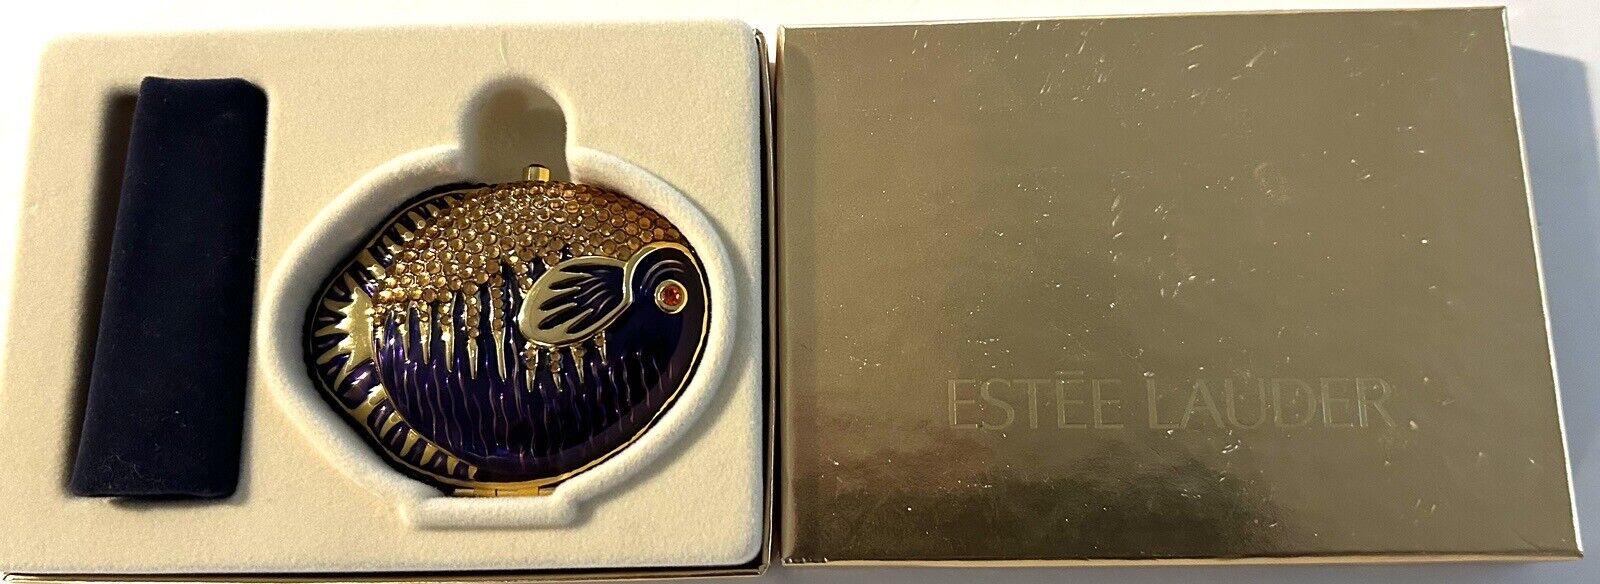 Estee Lauder Crystal & Enamel ￼Fish Compact ￼Lucidity Powder ￼￼New With Box ￼